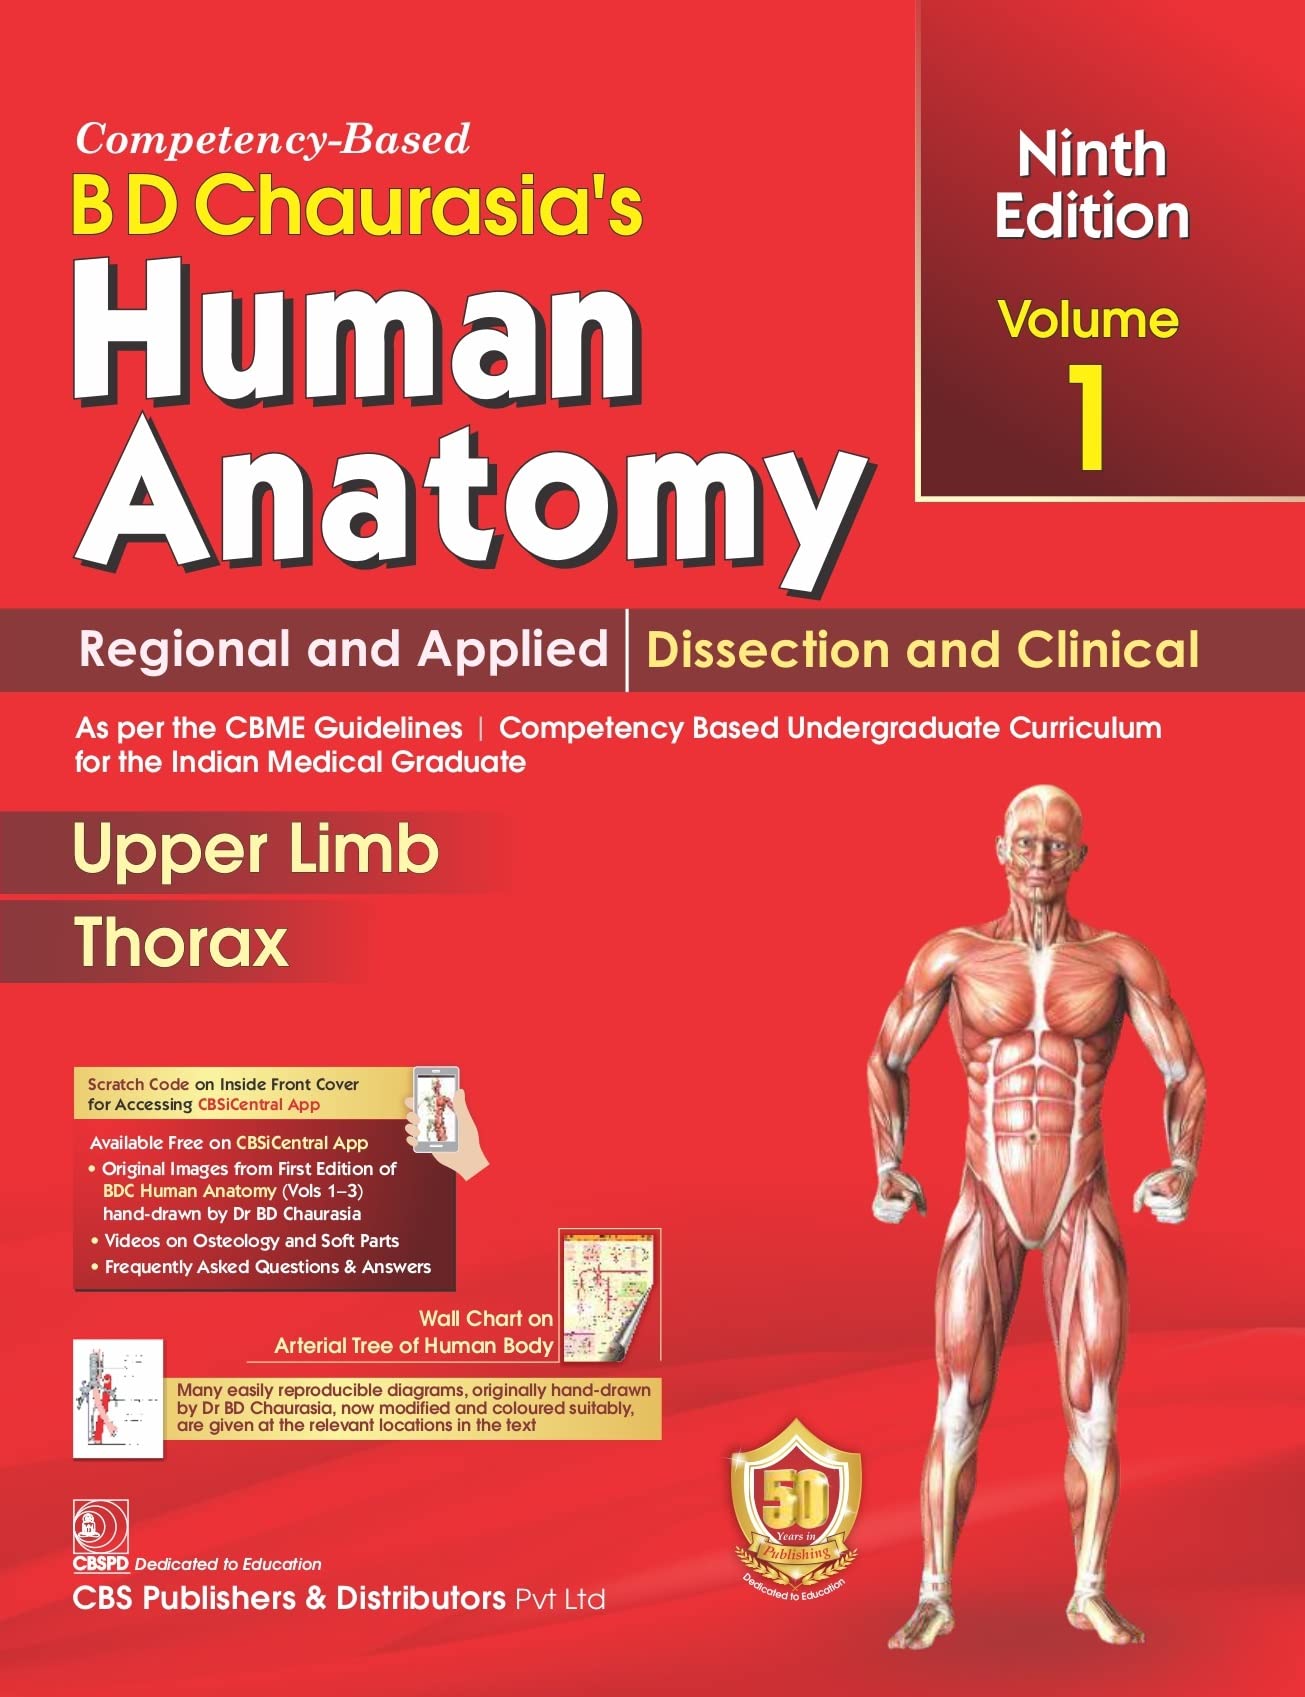 Human Anatomy, 9th Edition 2023, Vol.1 Regional and Applied Dissection and Clinical: Upper Limb Thorax